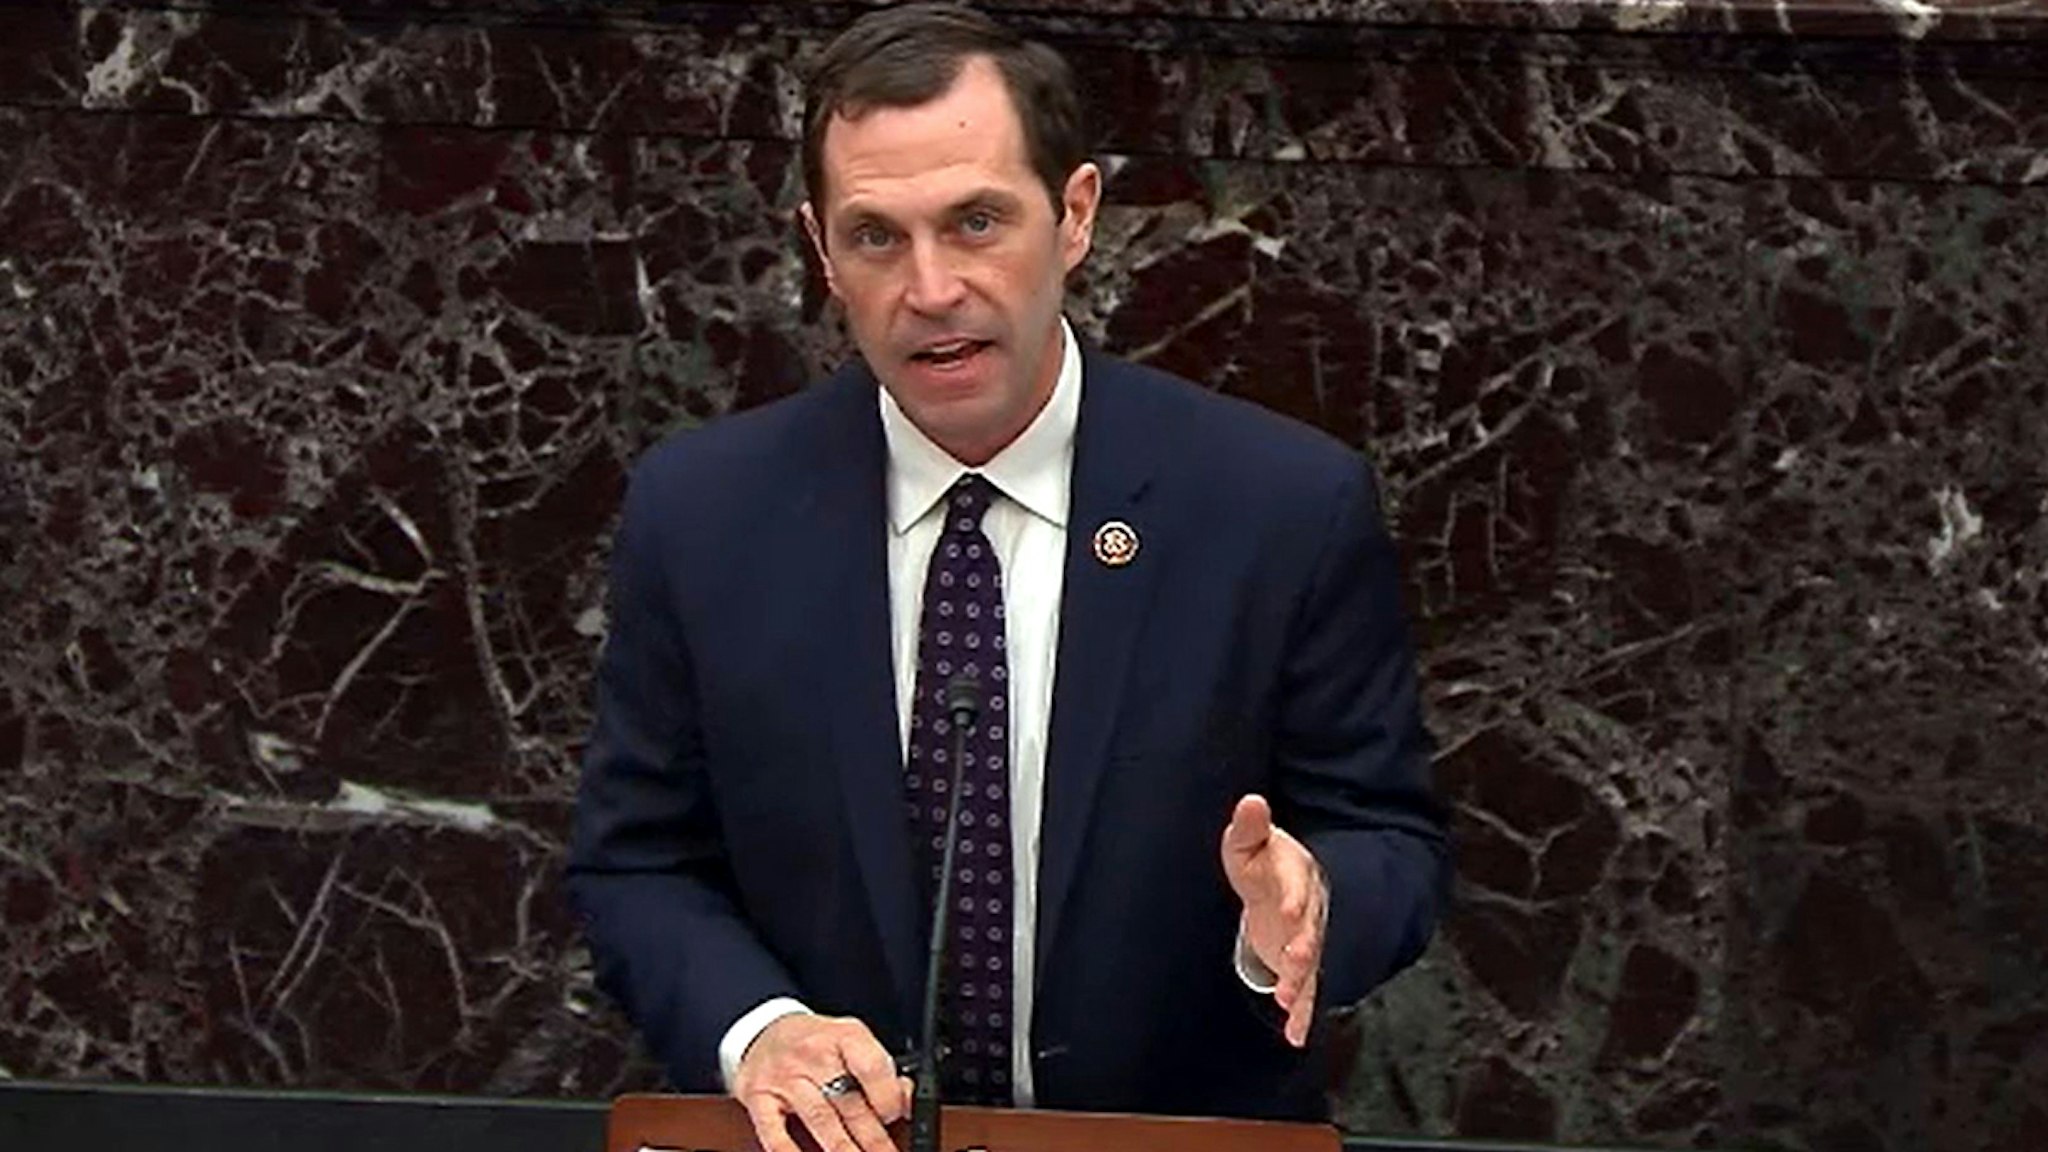 WASHINGTON, DC - JANUARY 22: In this screengrab taken from a Senate Television webcast, House impeachment manager Rep. Jason Crow (D-CO) speaks during impeachment proceedings against U.S. President Donald Trump in the Senate at the U.S. Capitol on January 22, 2020 in Washington, DC.